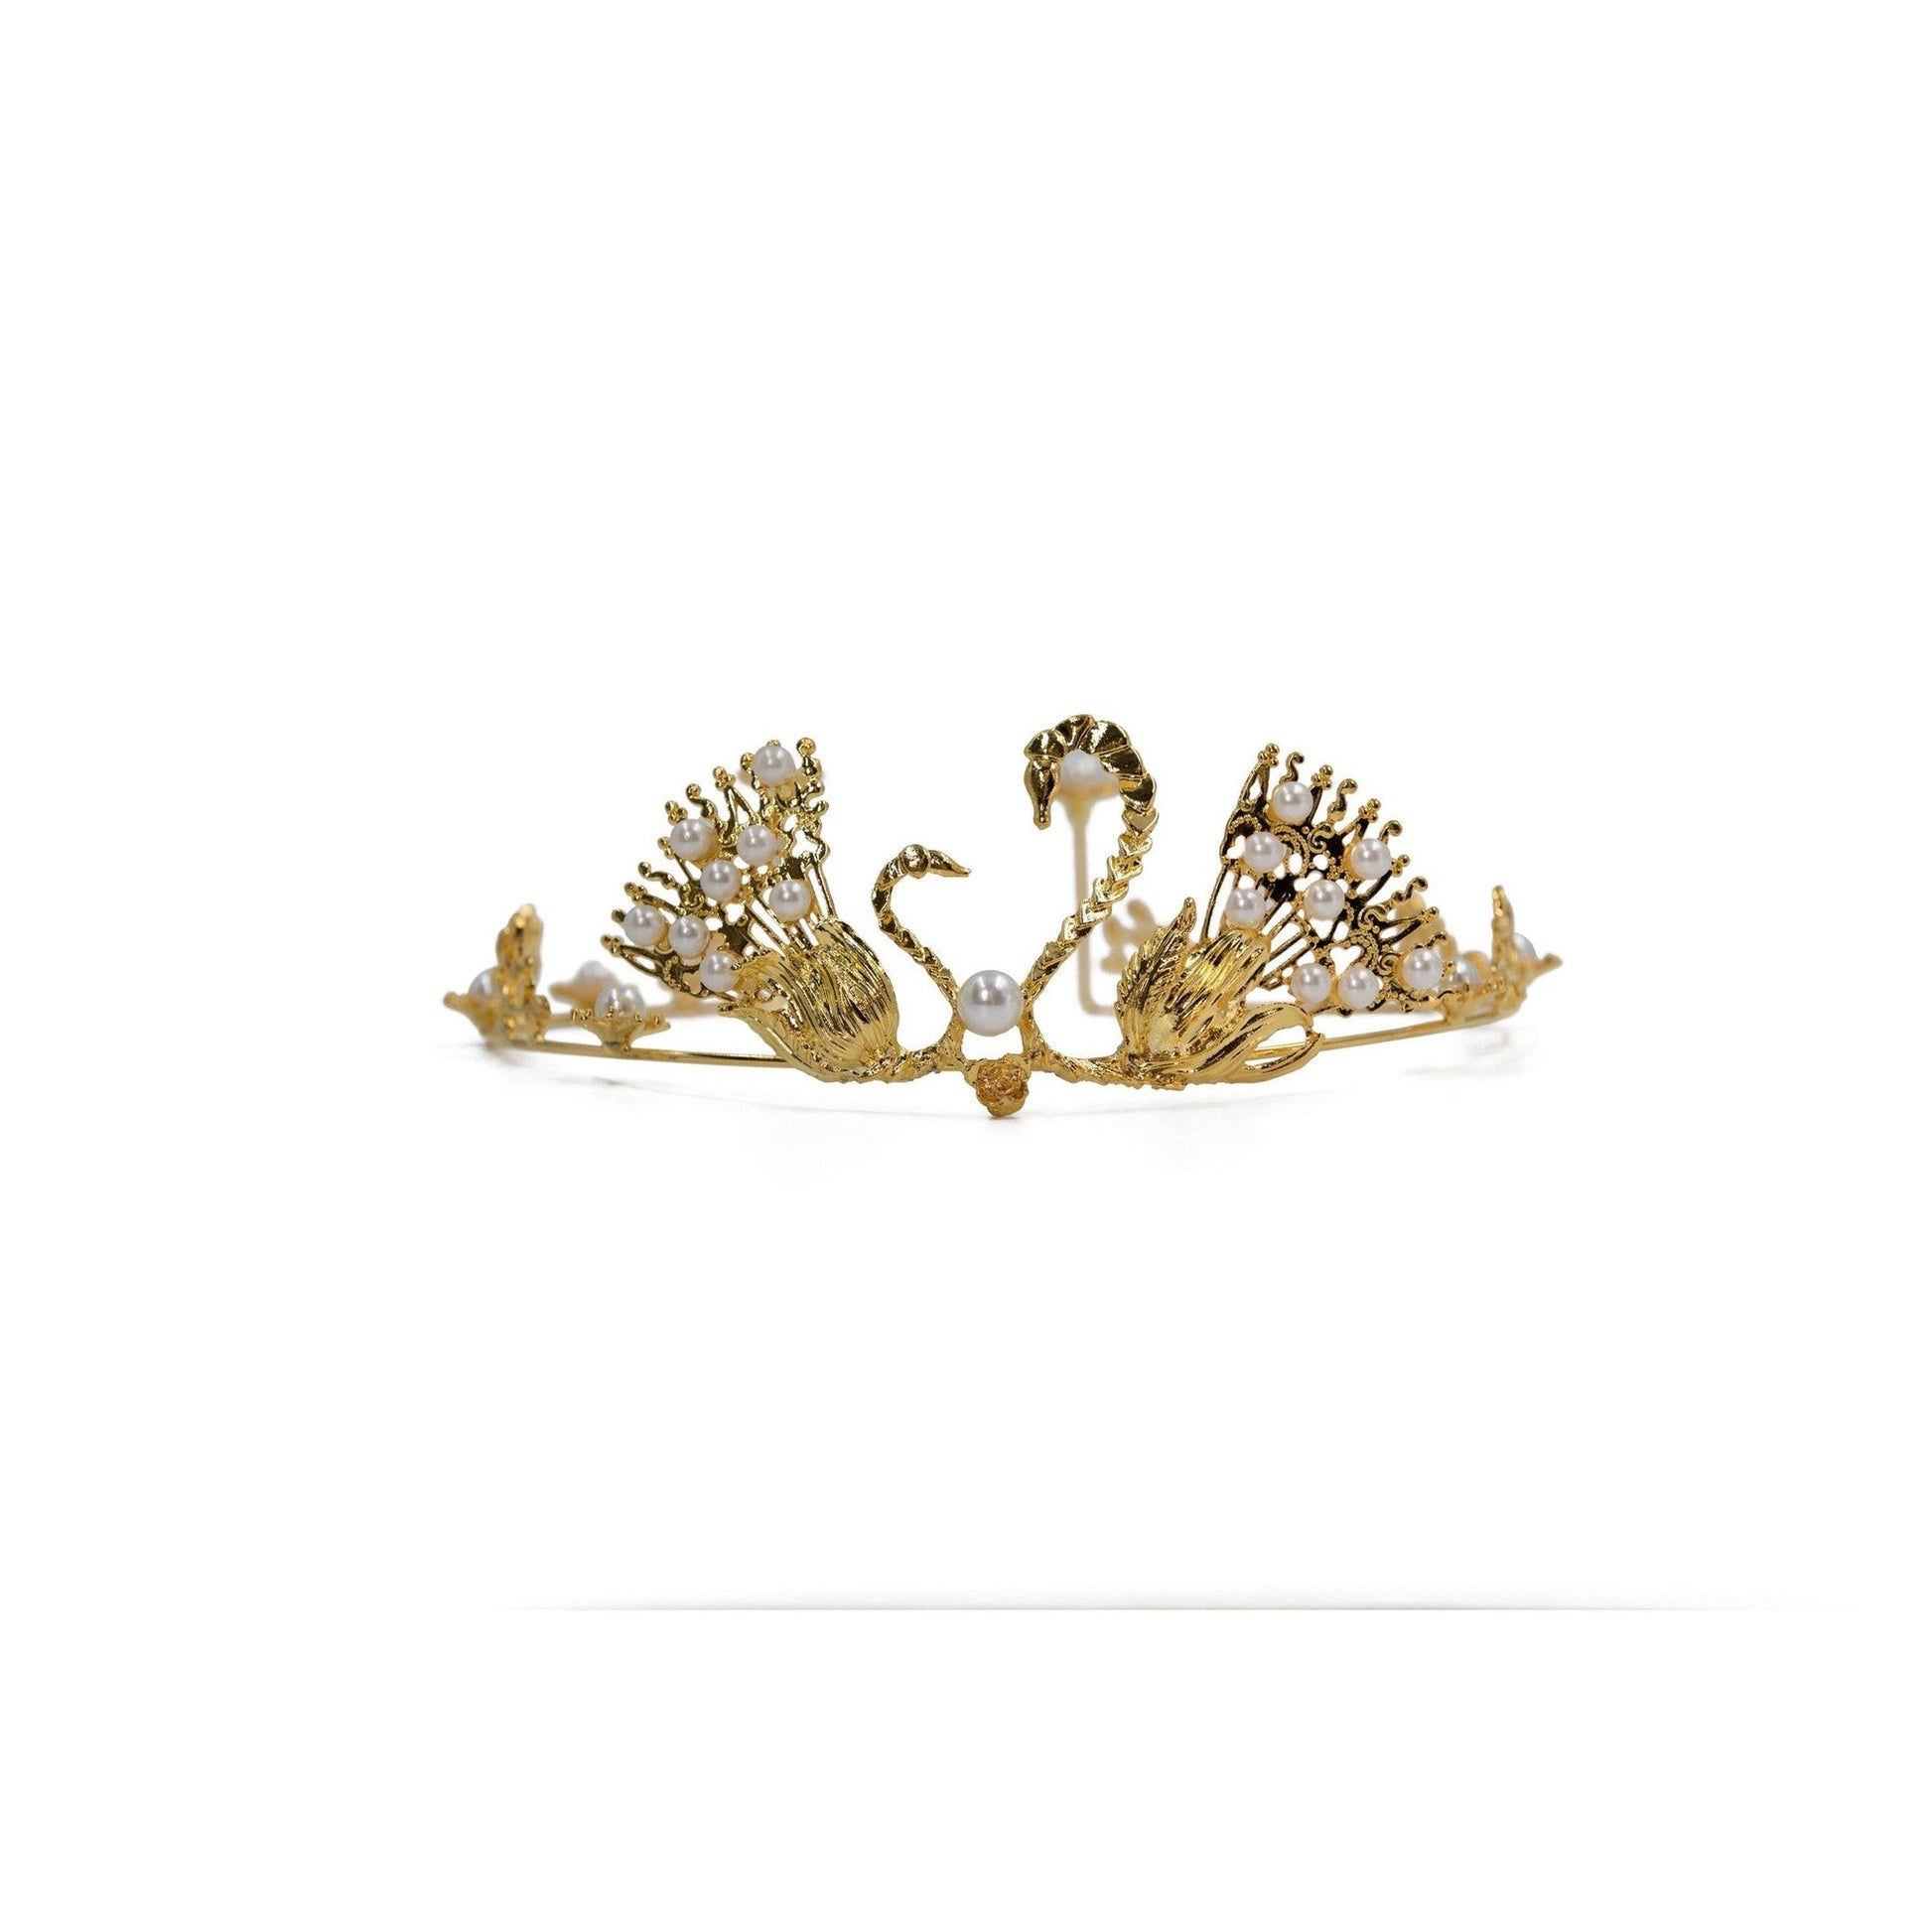 Swan Queen Tiara in Gold or Silver with Pearl Accents